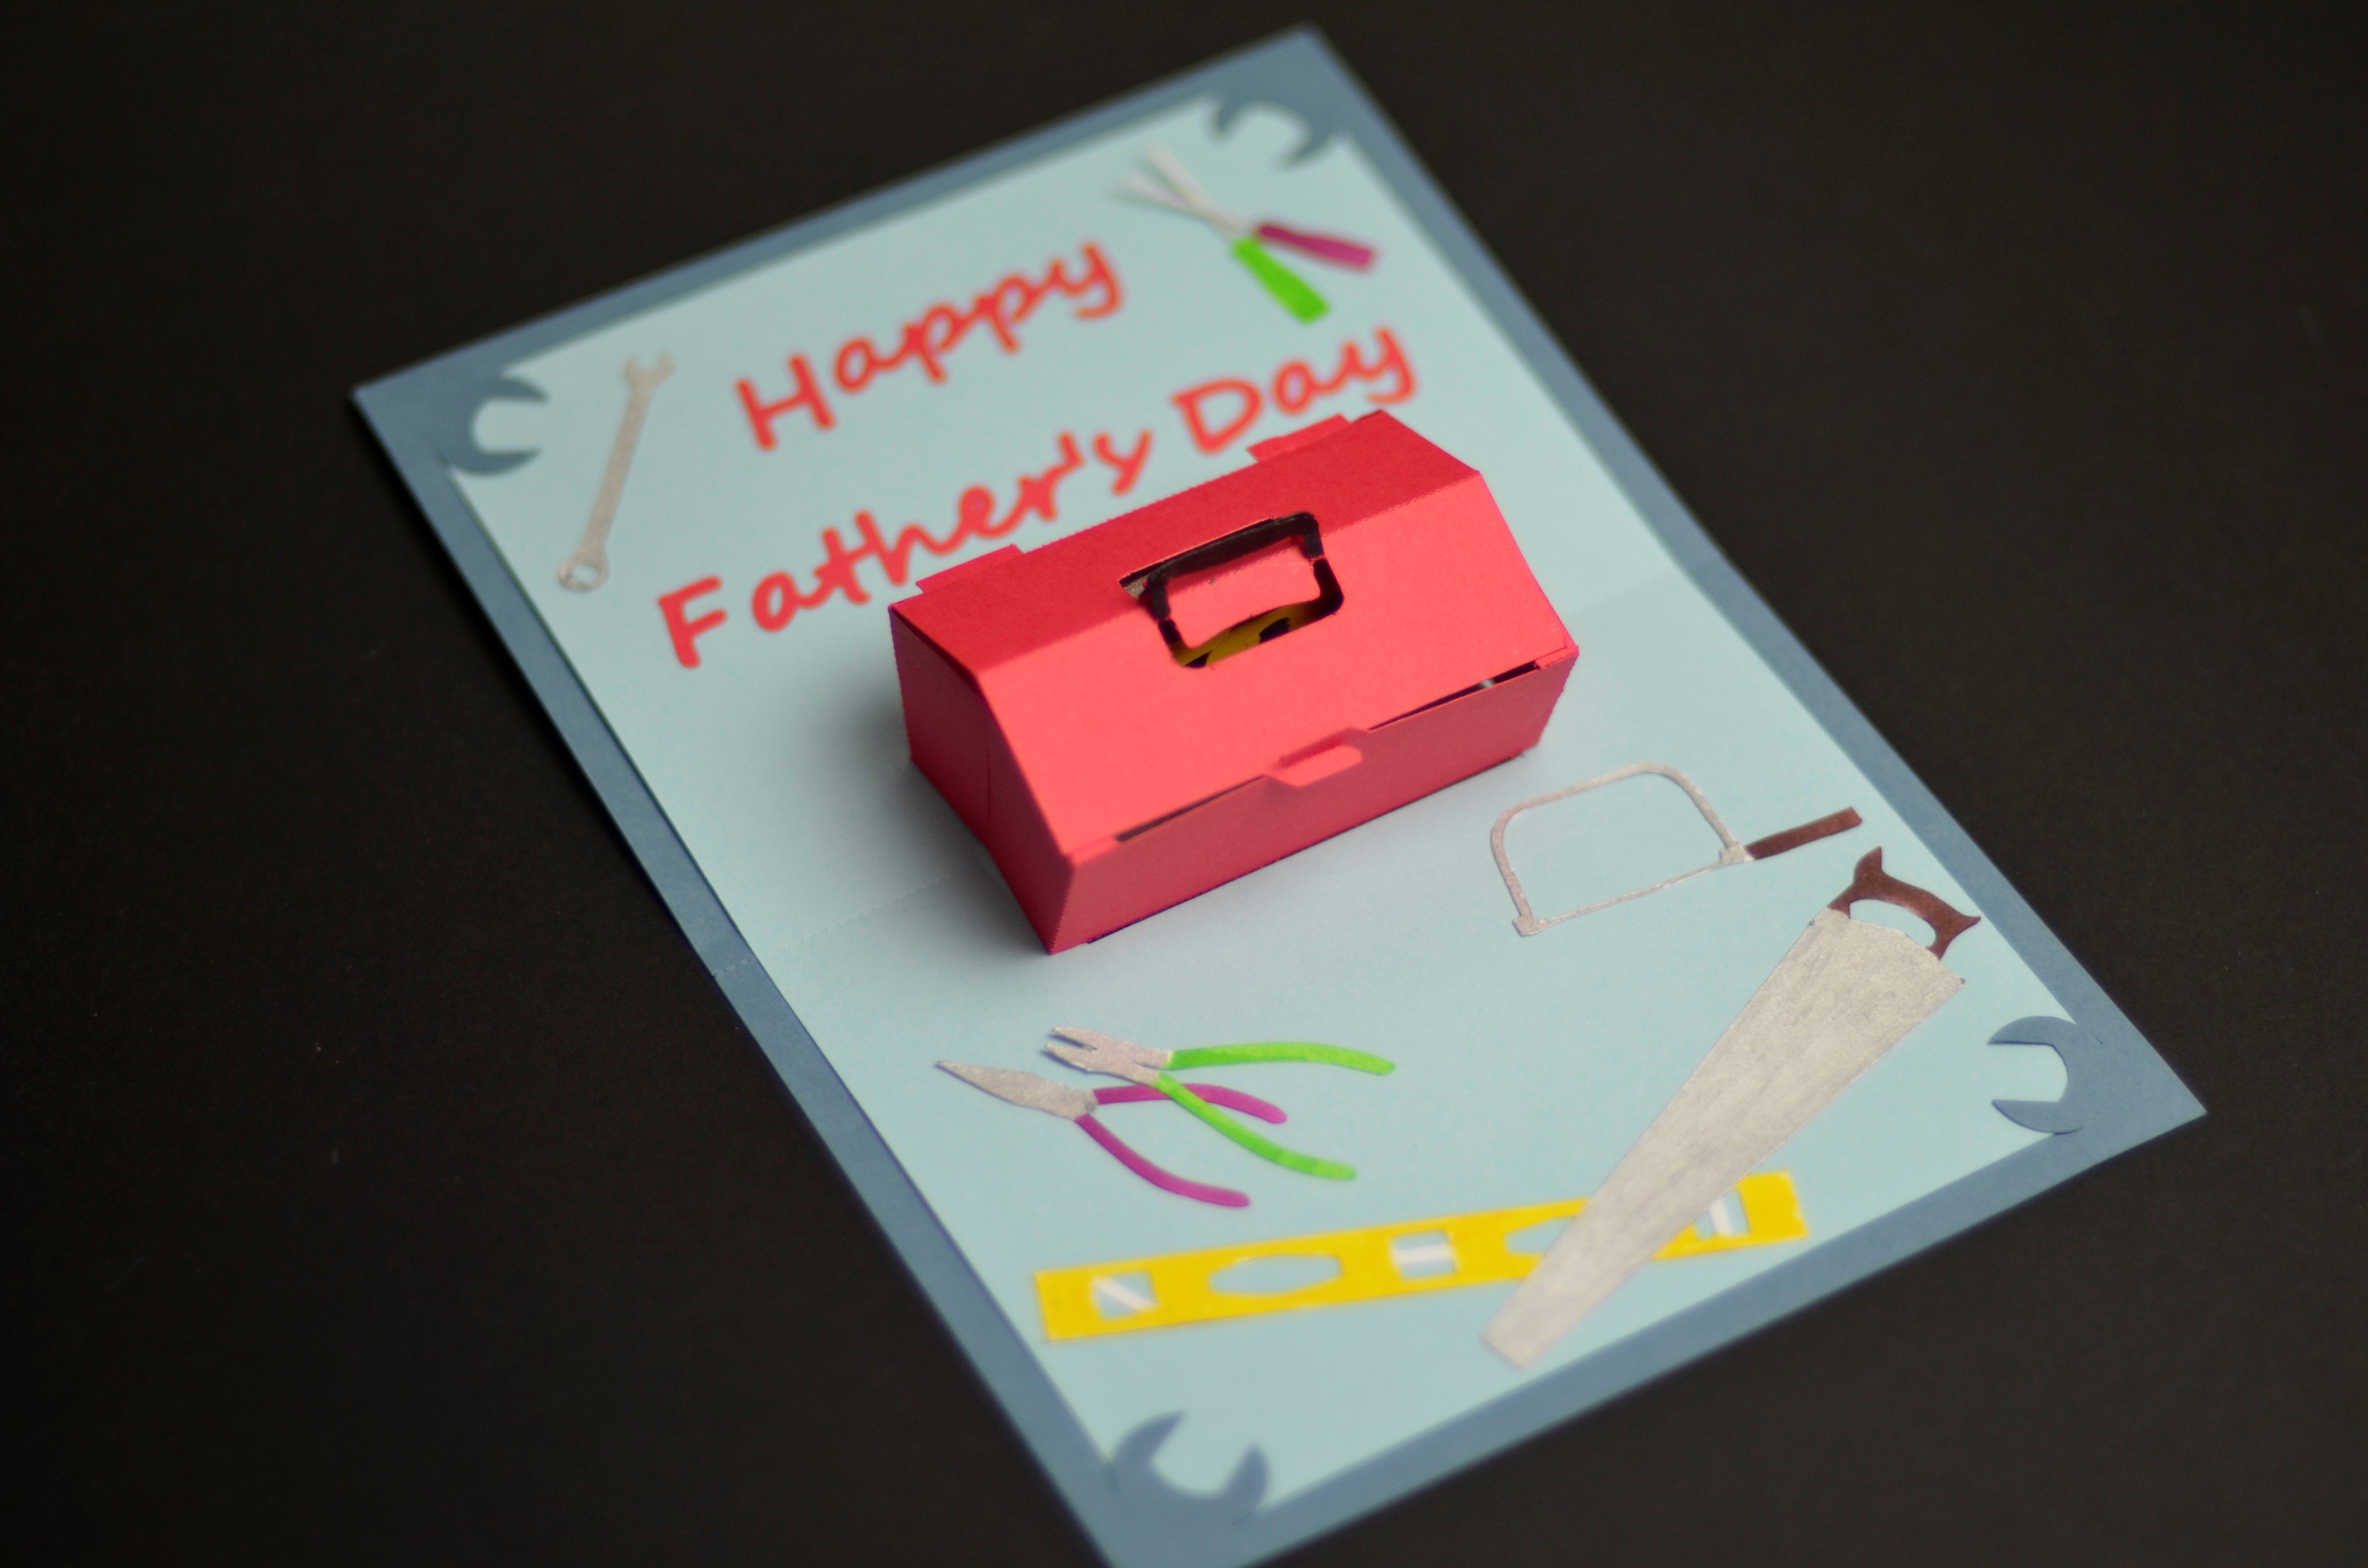 father-s-day-pop-up-card-tool-box-creative-pop-up-cards